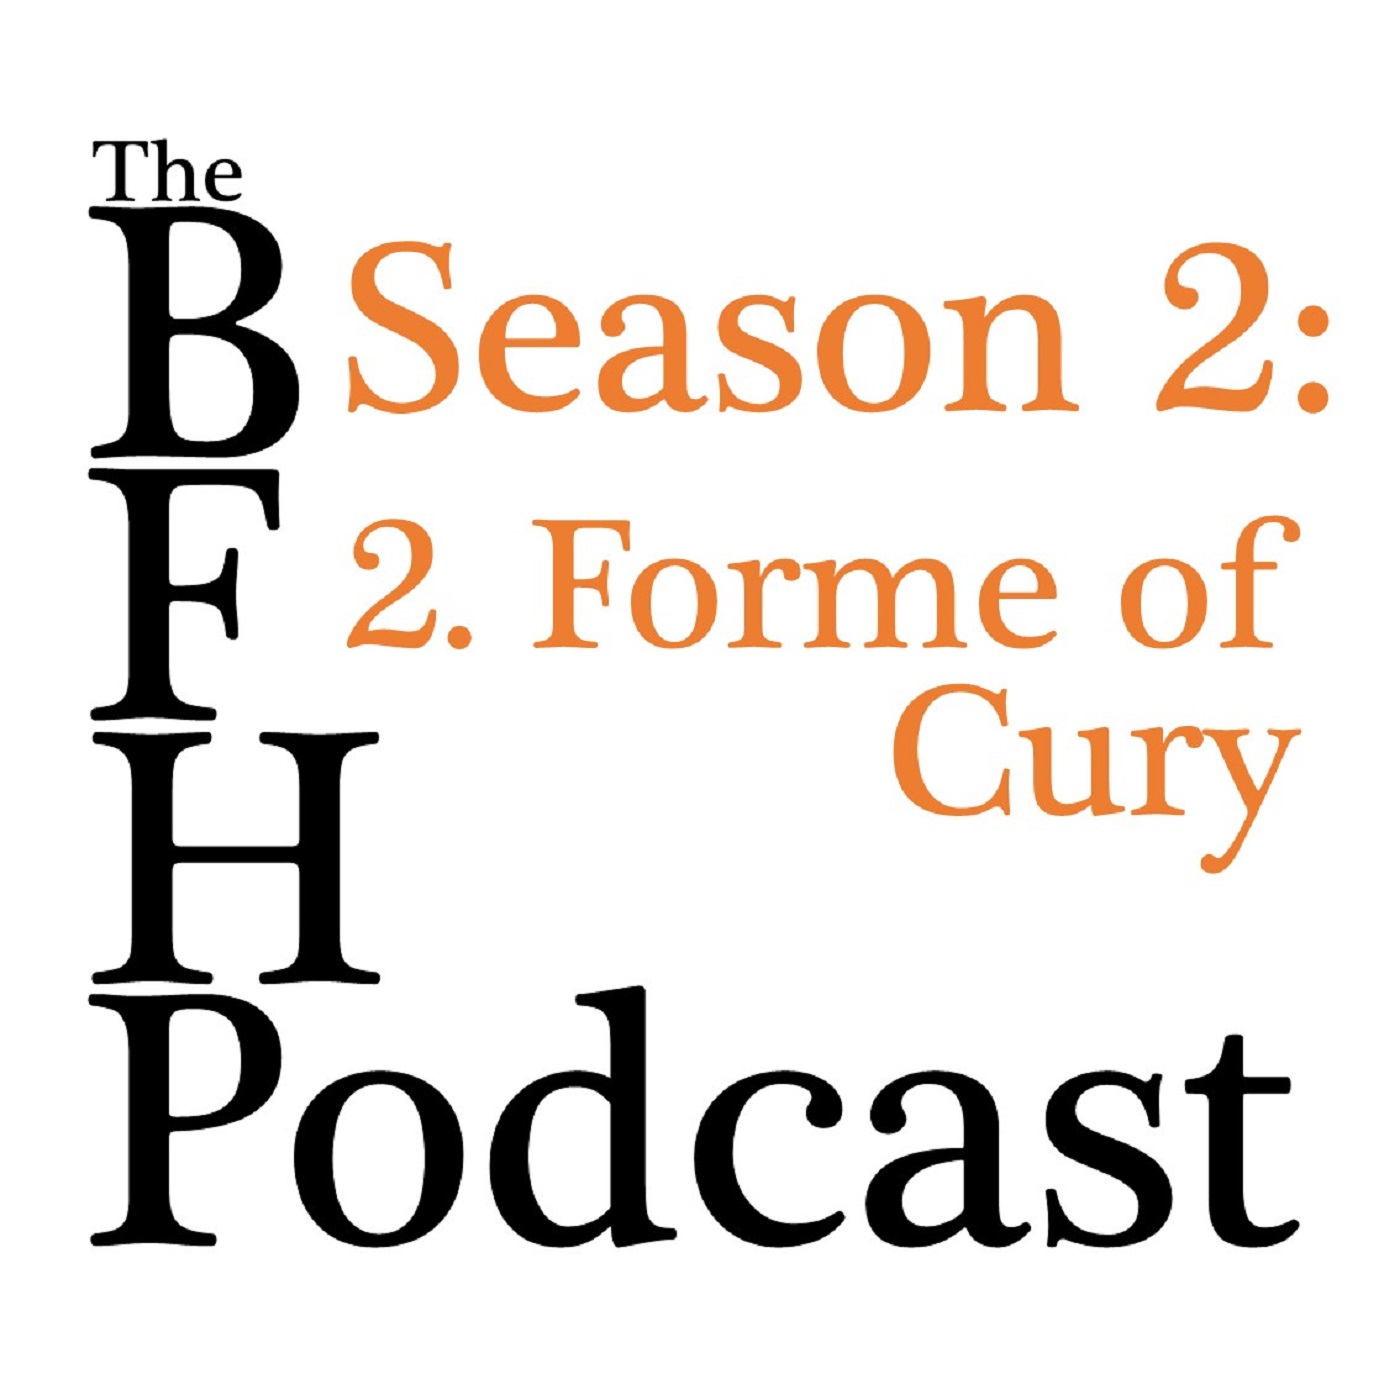 Artwork for podcast The British Food History Podcast